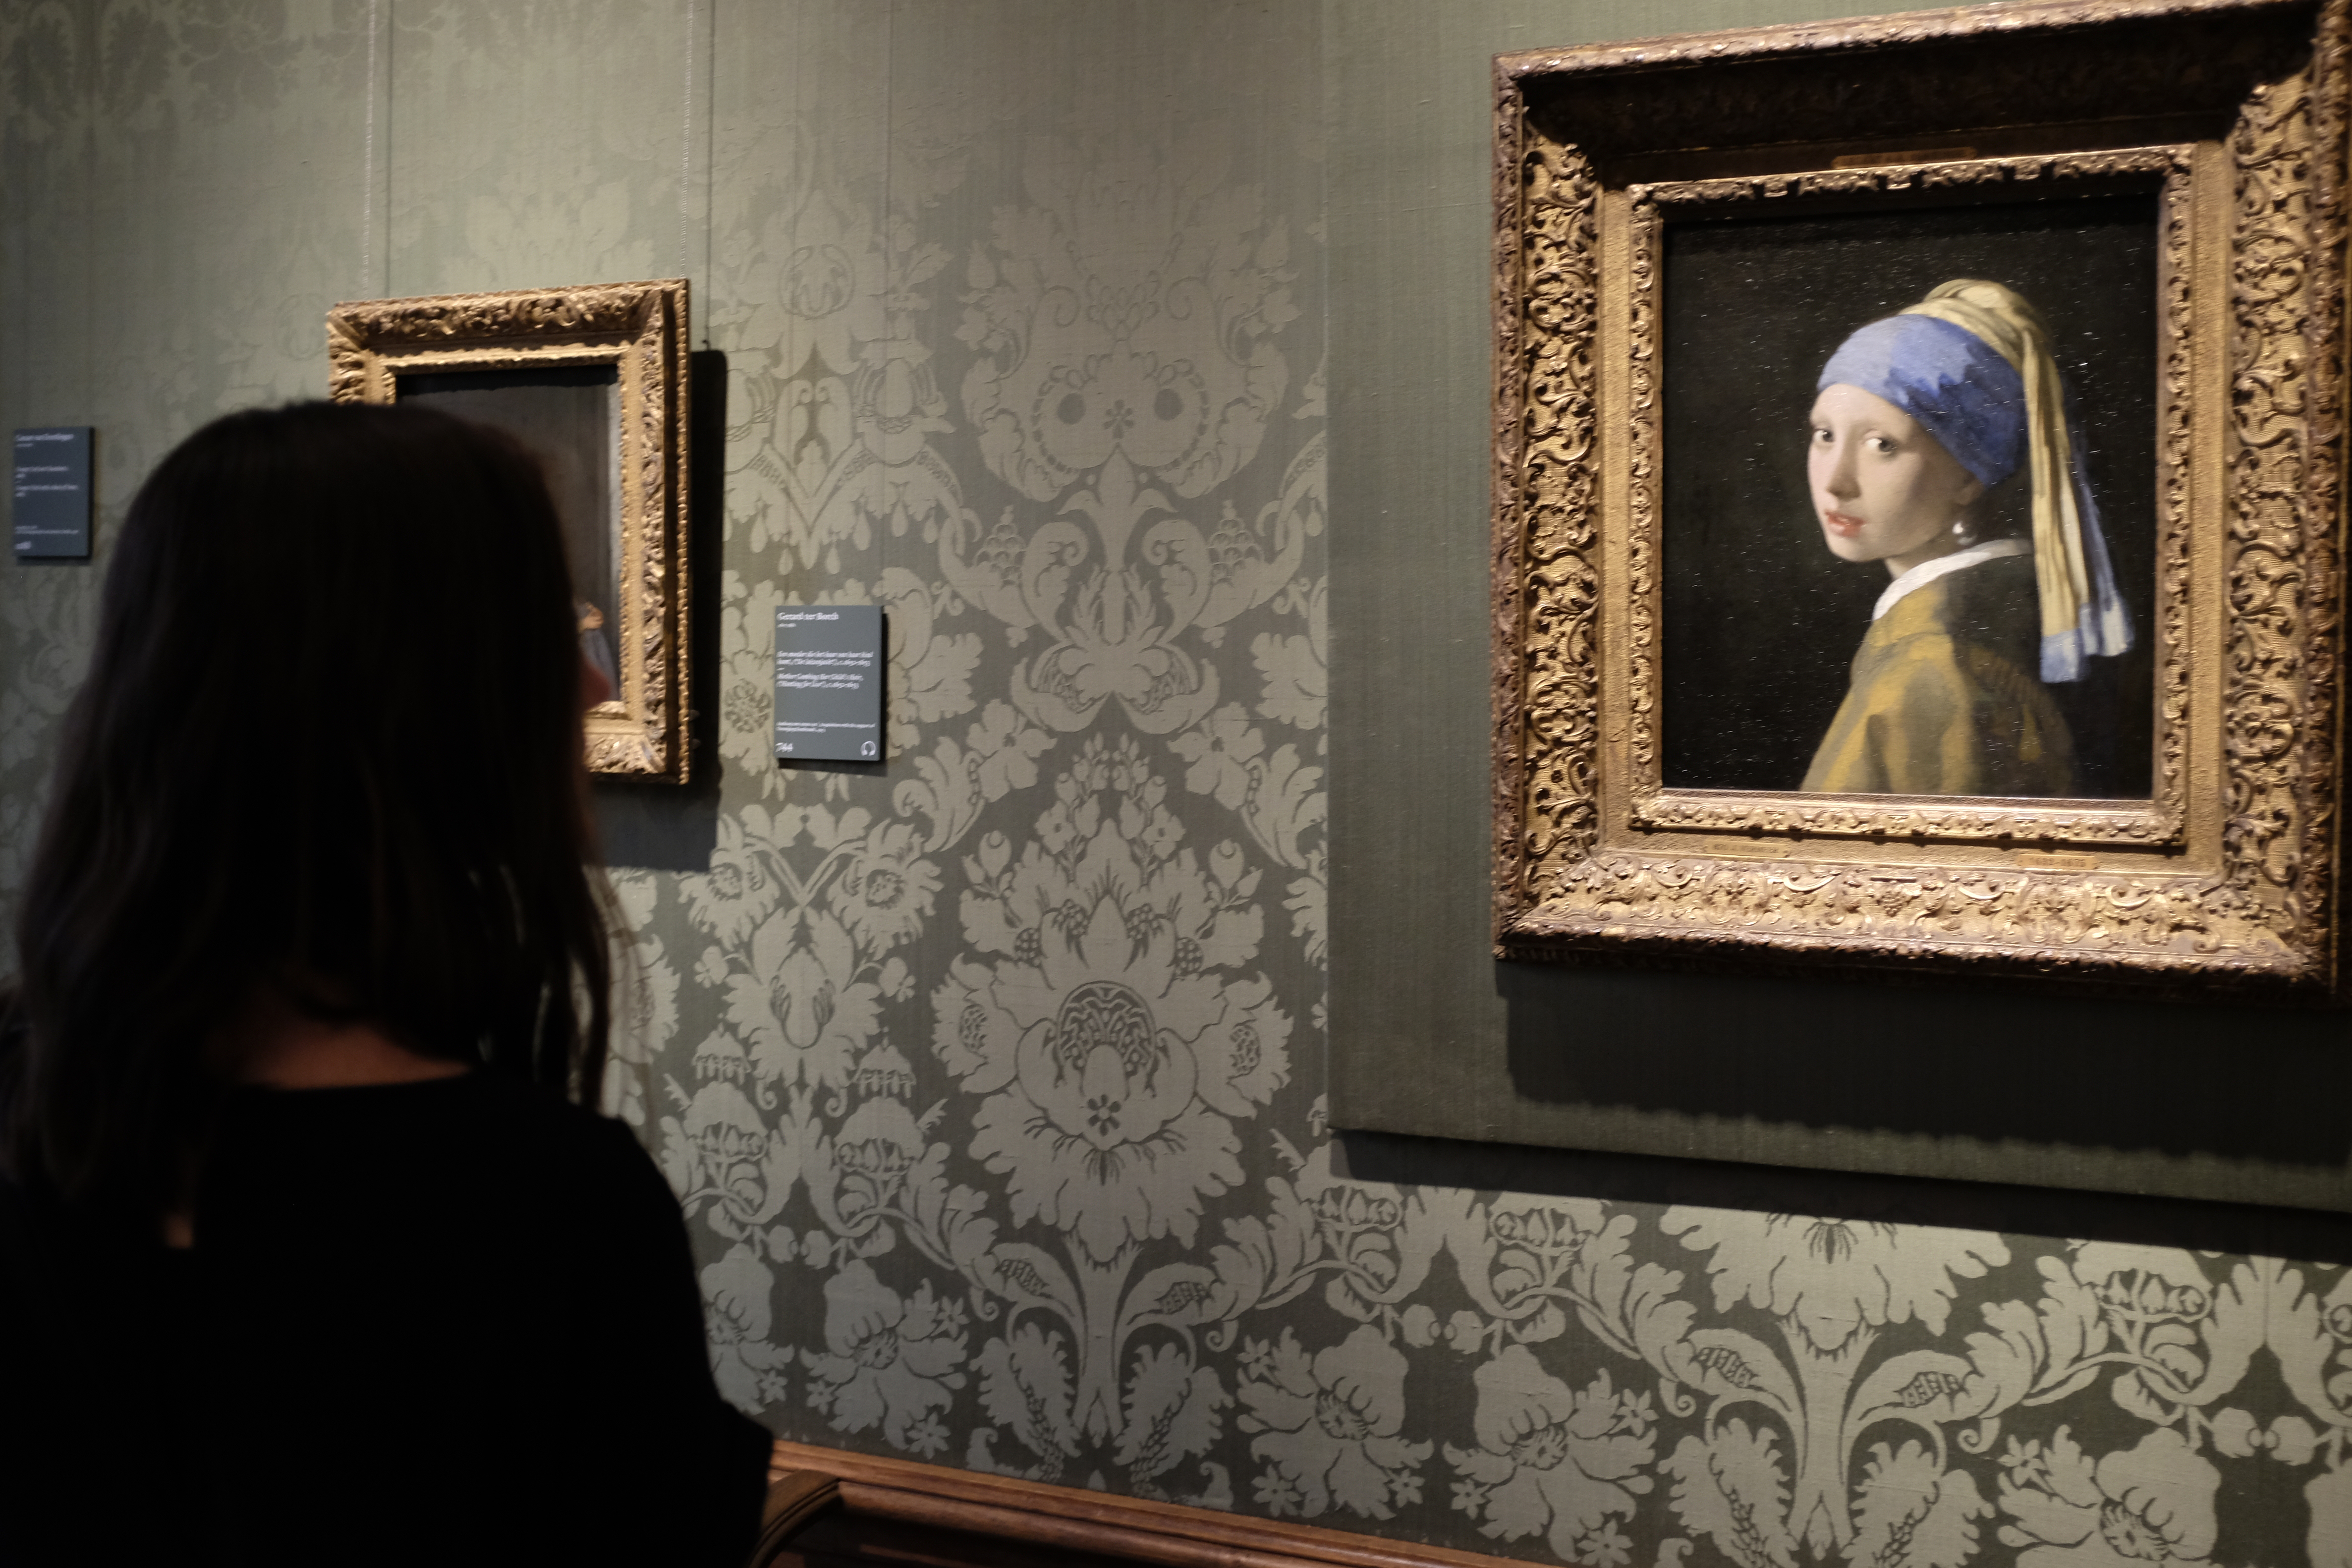 Alyssa looks at Girl with a Pearl Earring